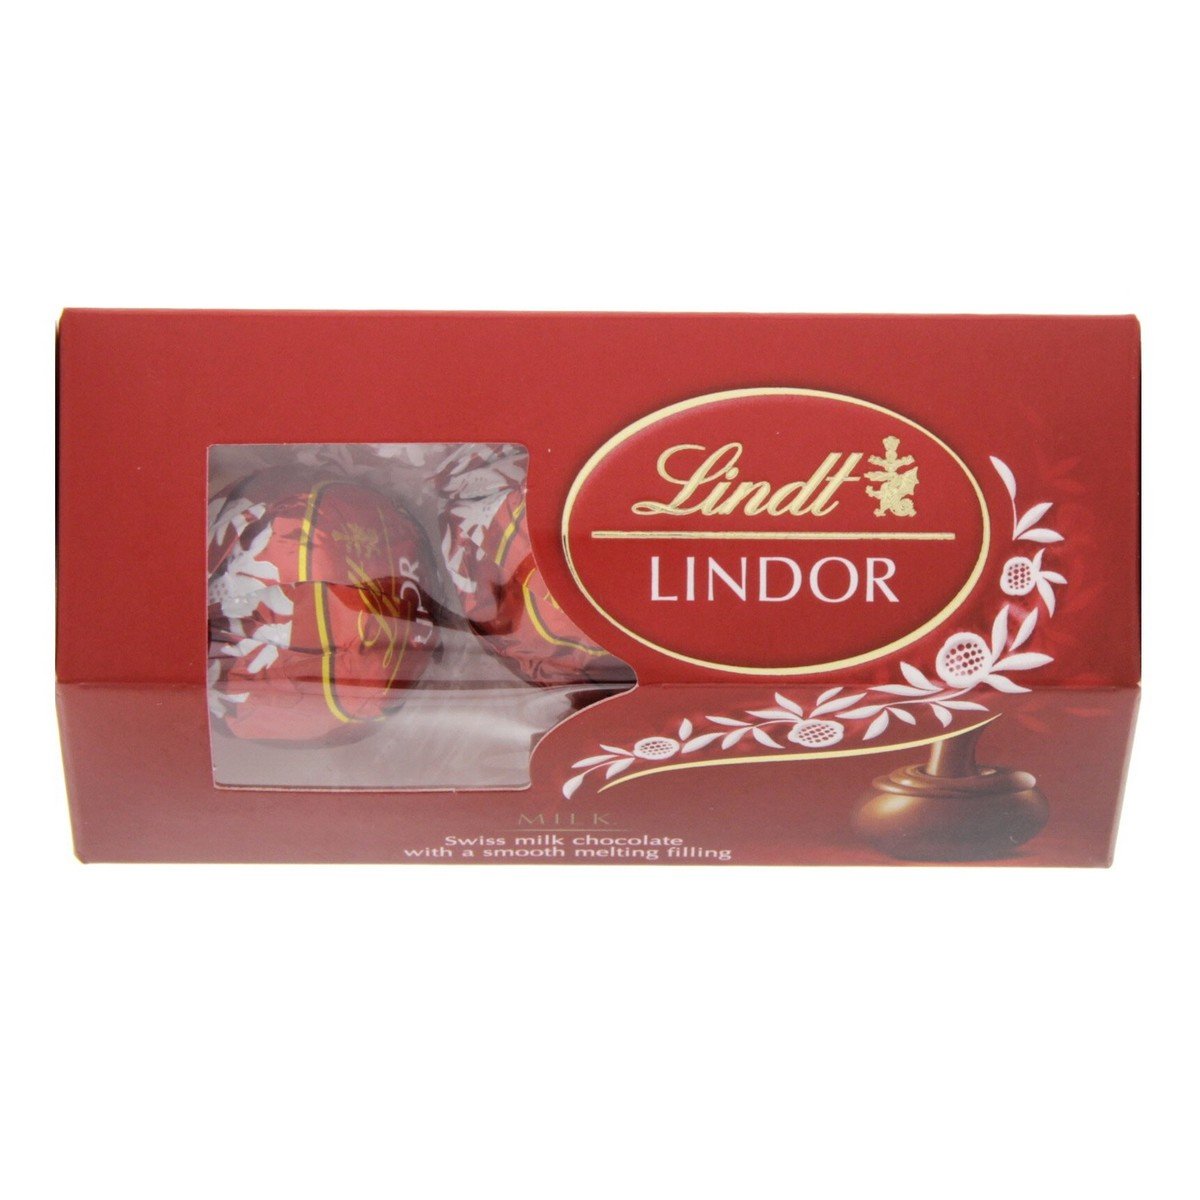 Lindt Lindor Swiss Milk Chocolate With A Smooth Filling 37 g